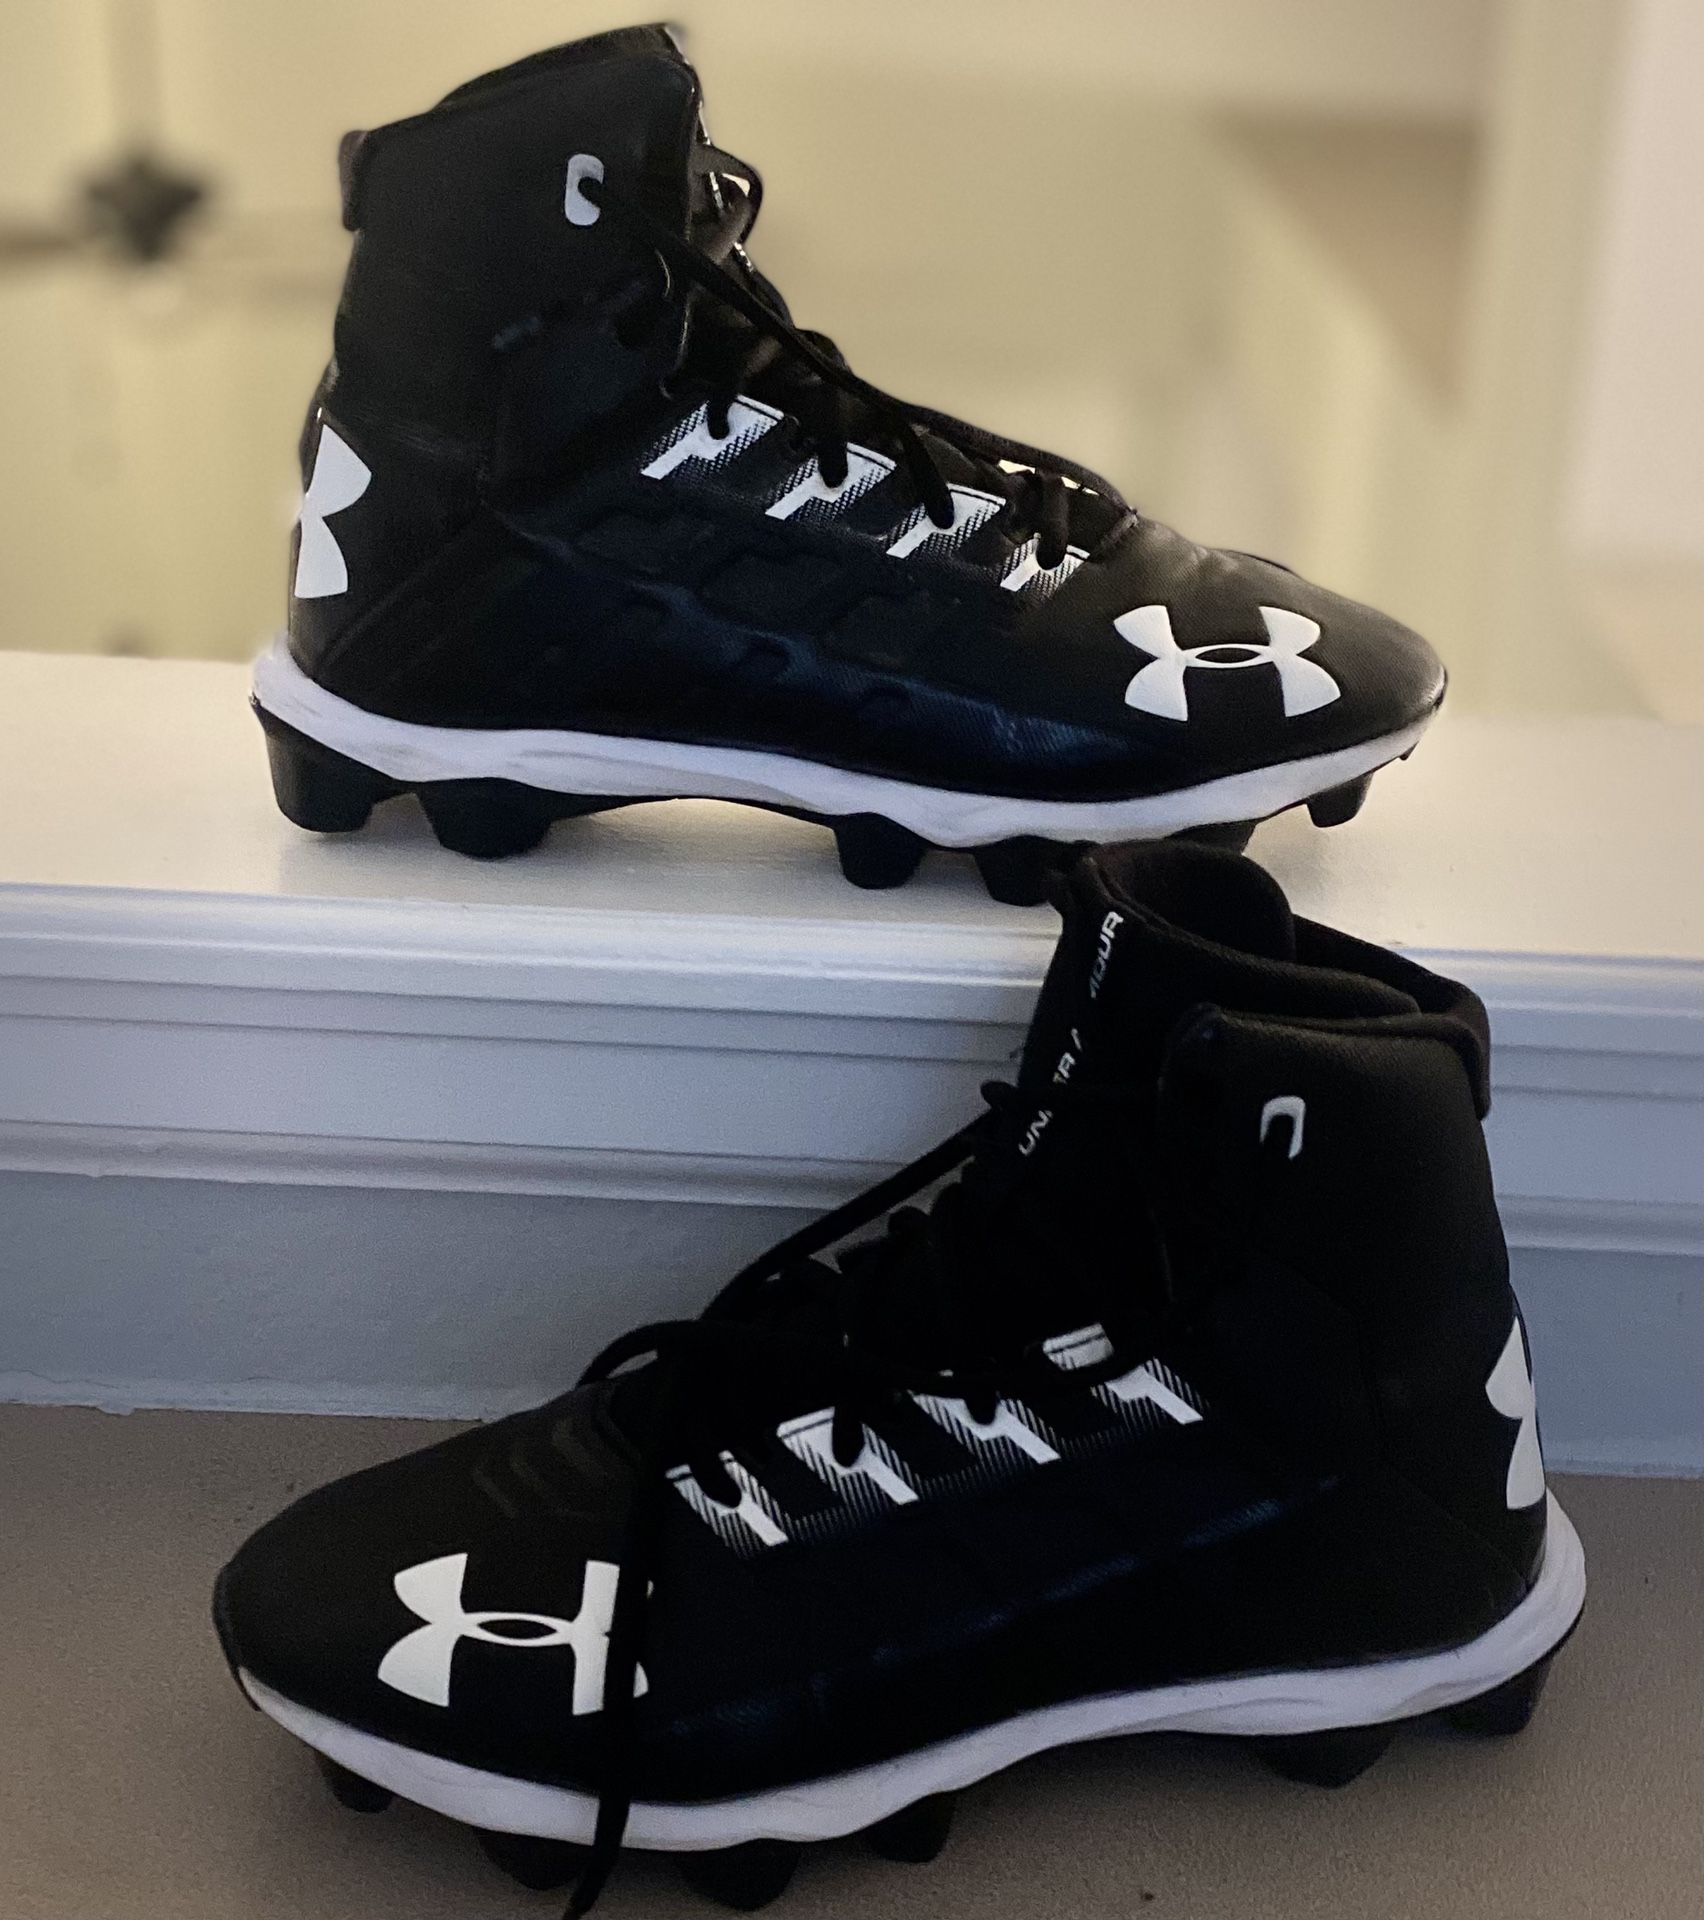 Under Armour Football Cleats - Youth 6